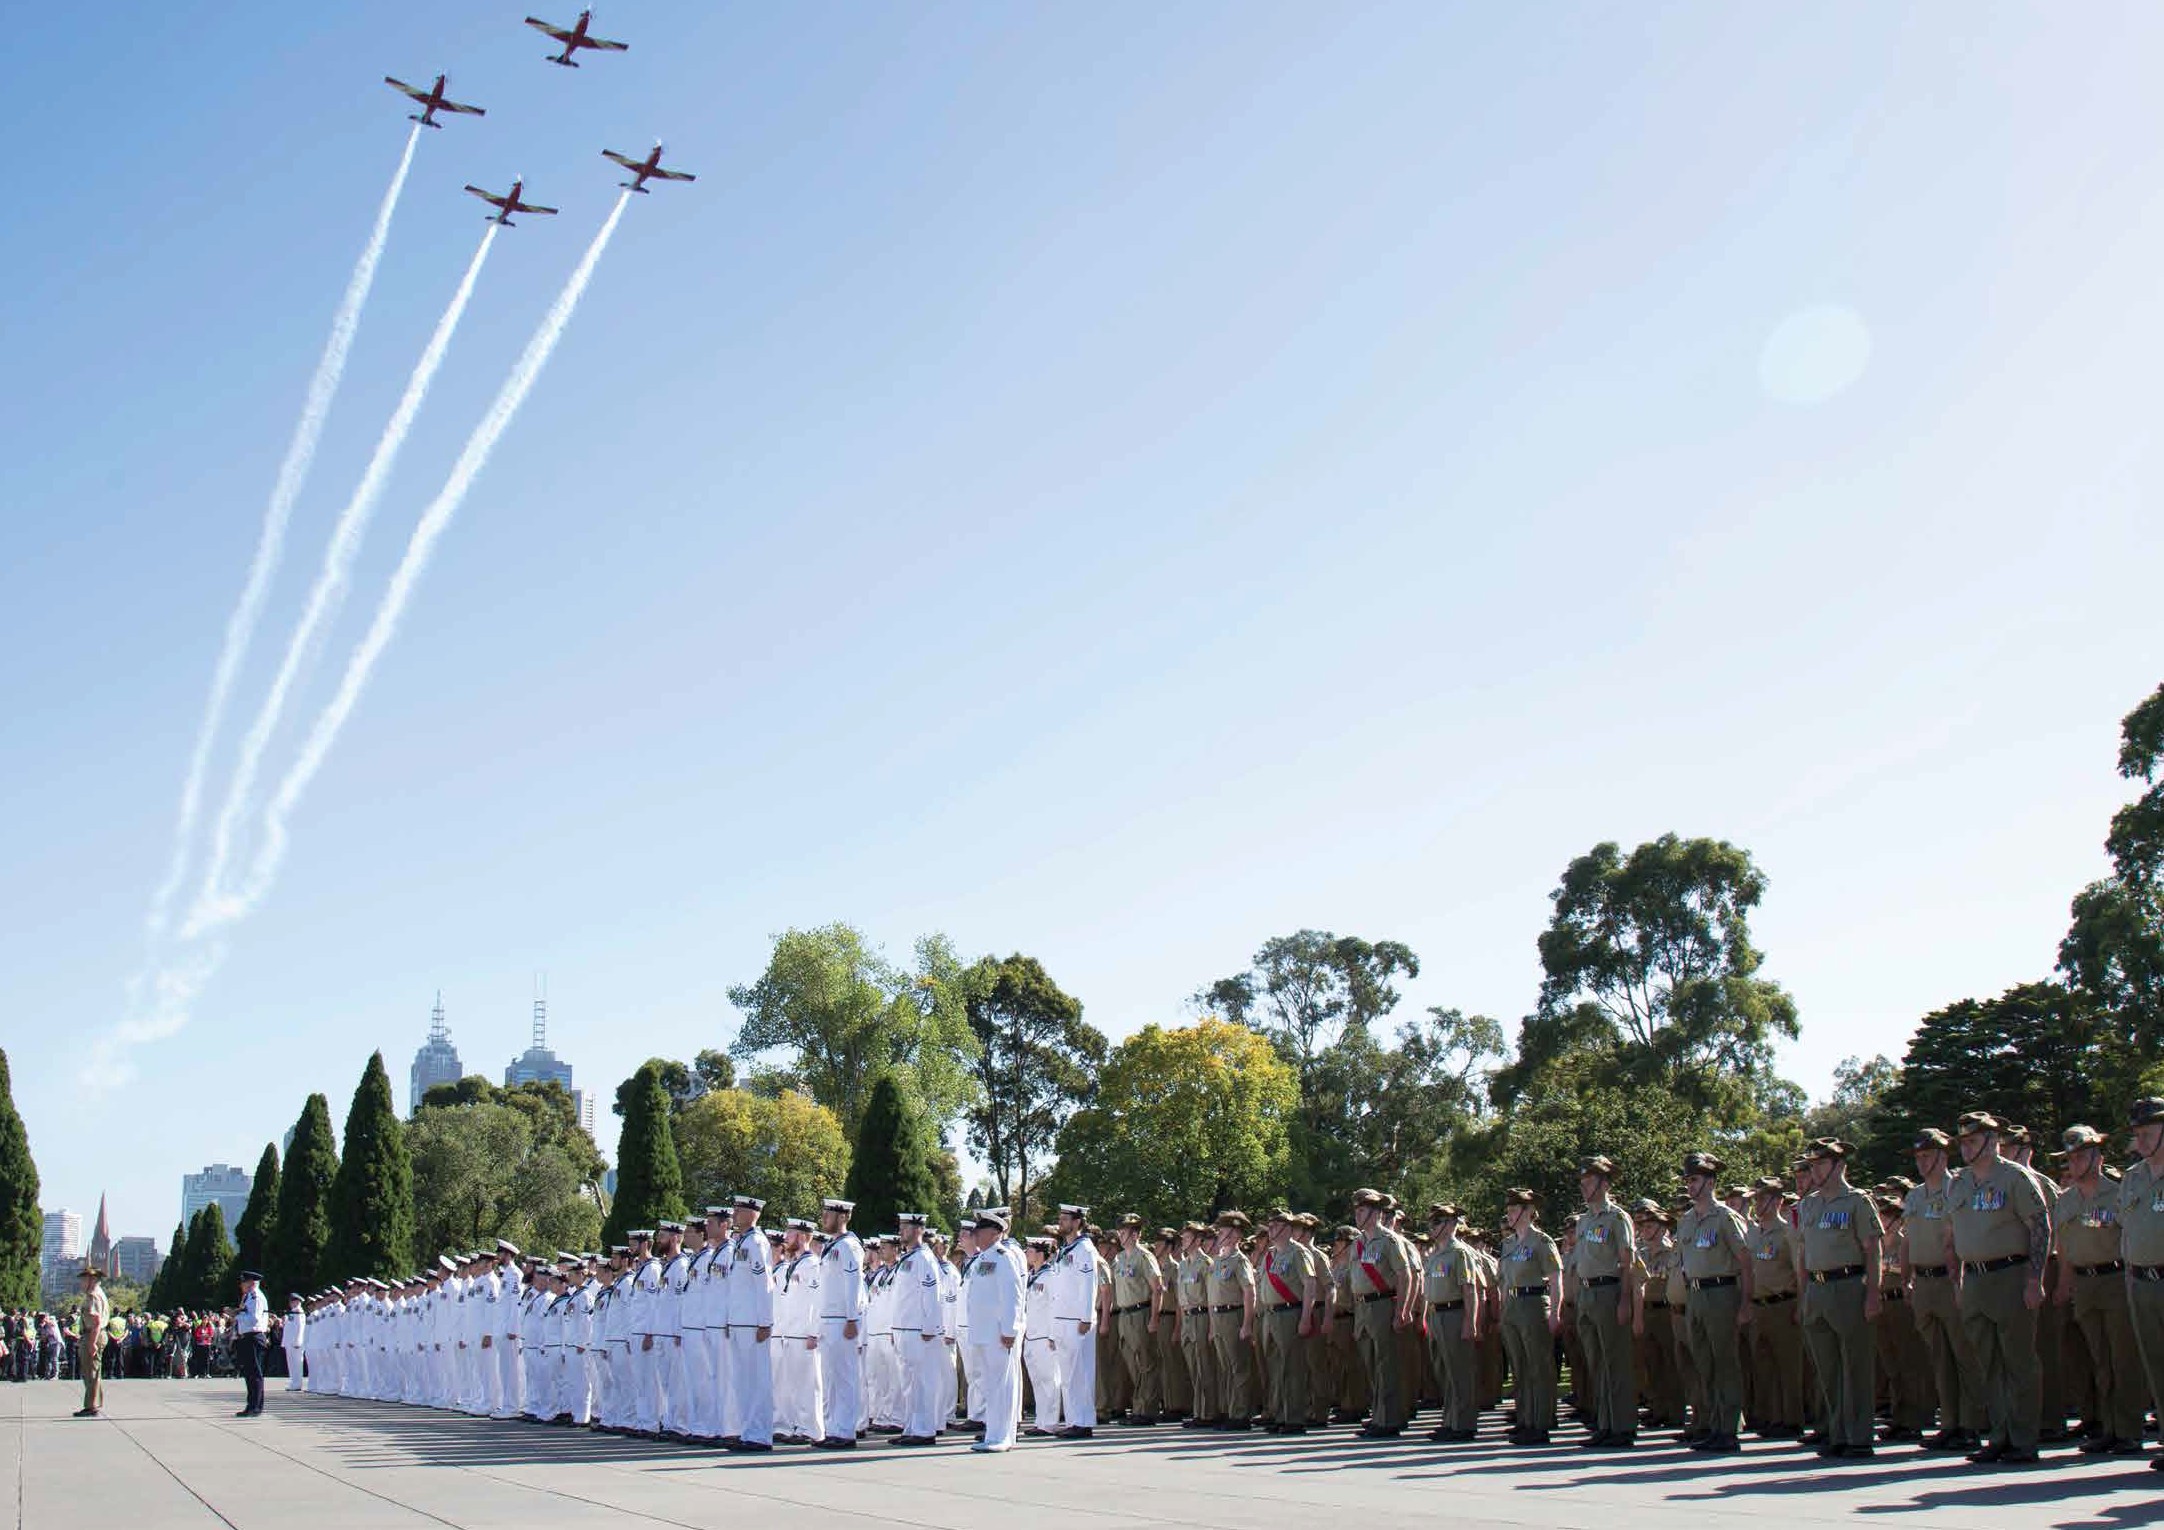 soldiers standing in formation with jets flying over head in a cross formation.